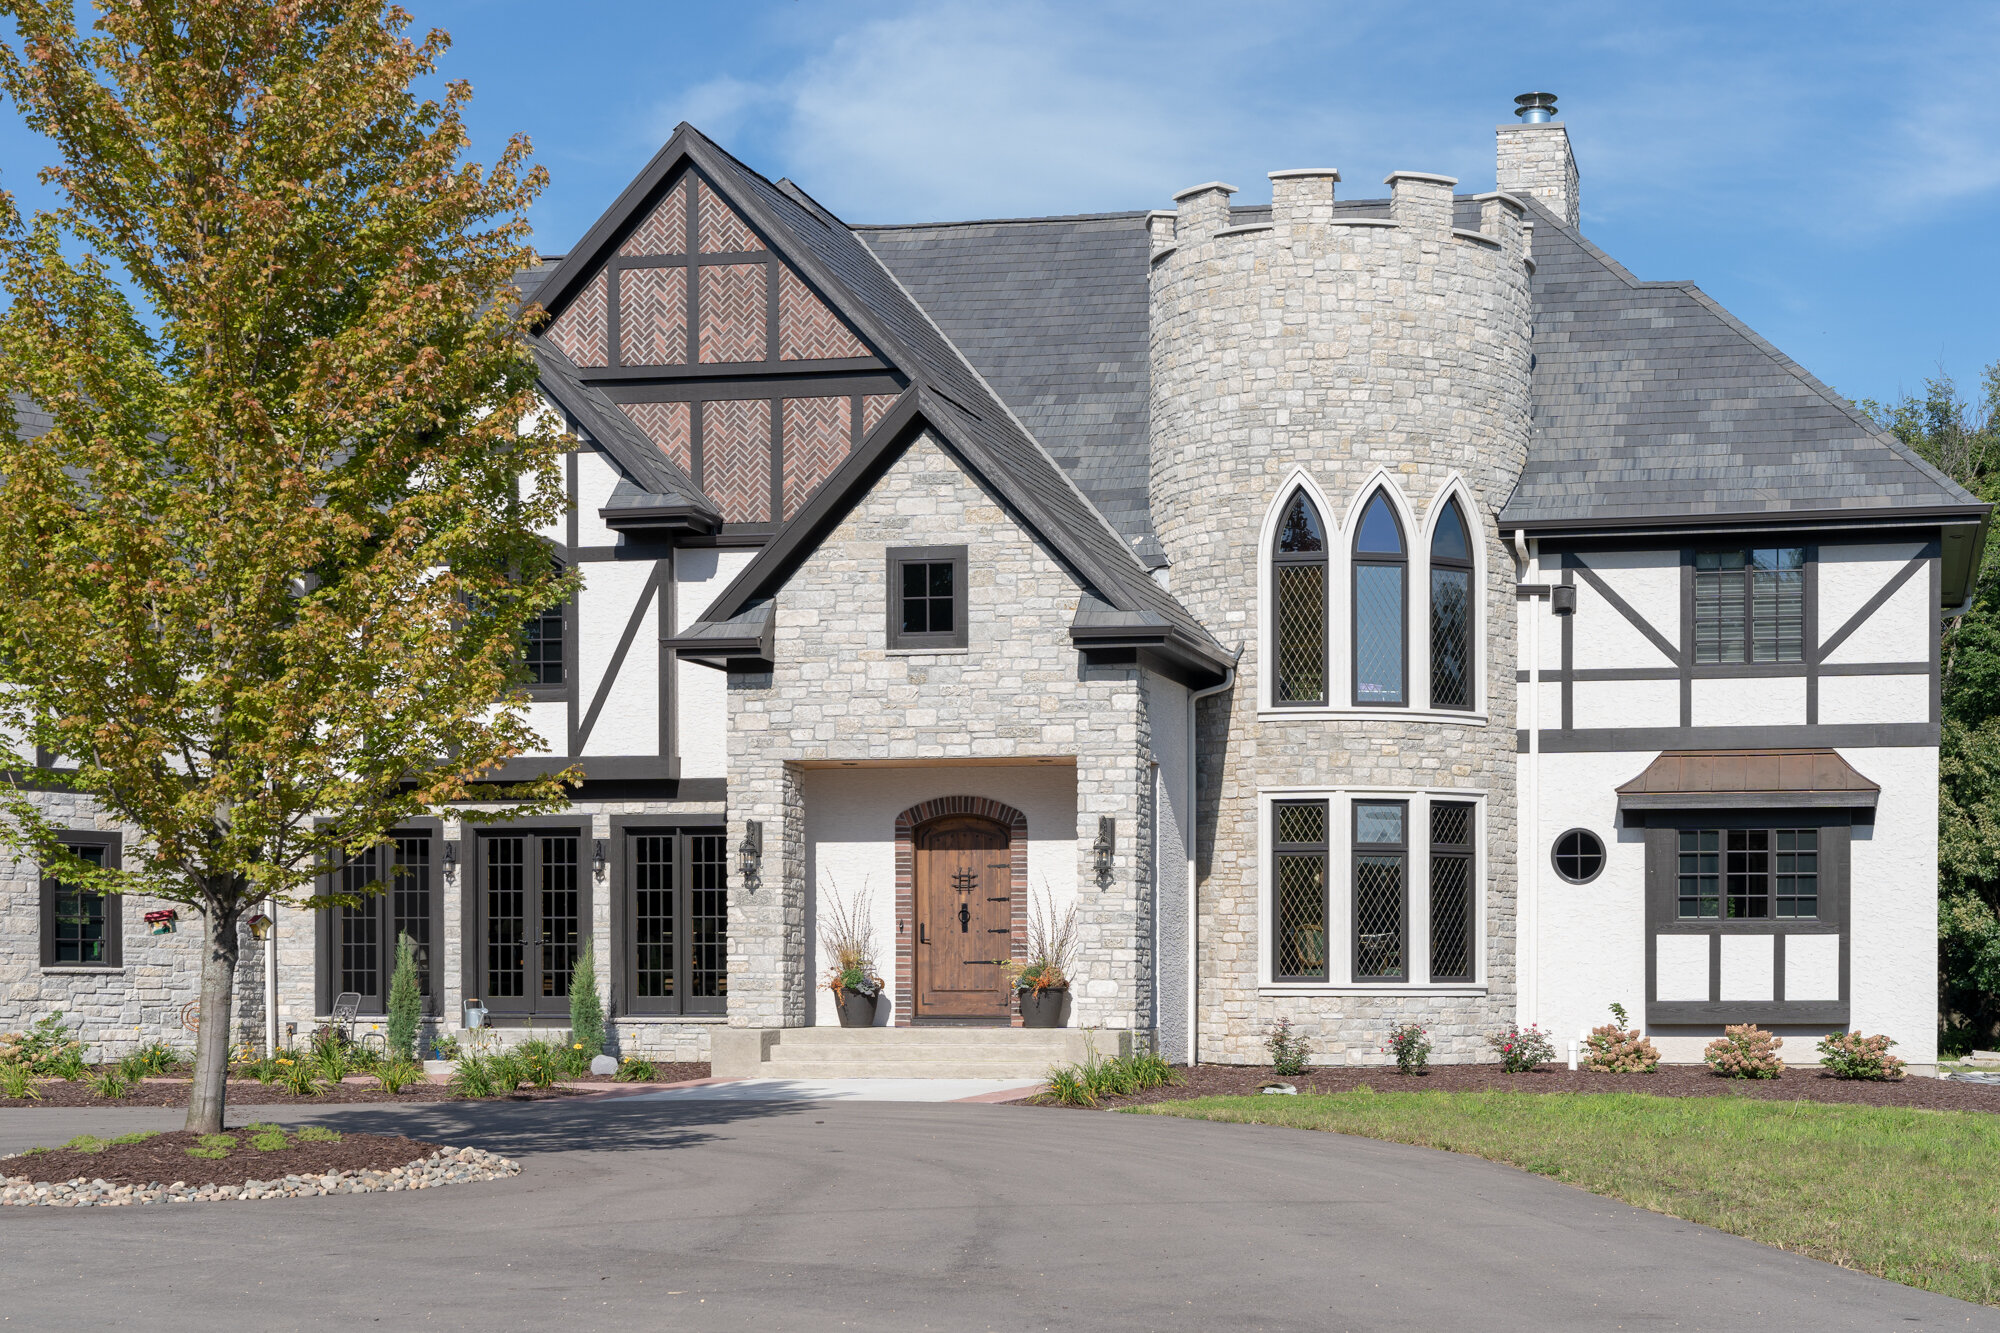 Contemporary home with stone turret